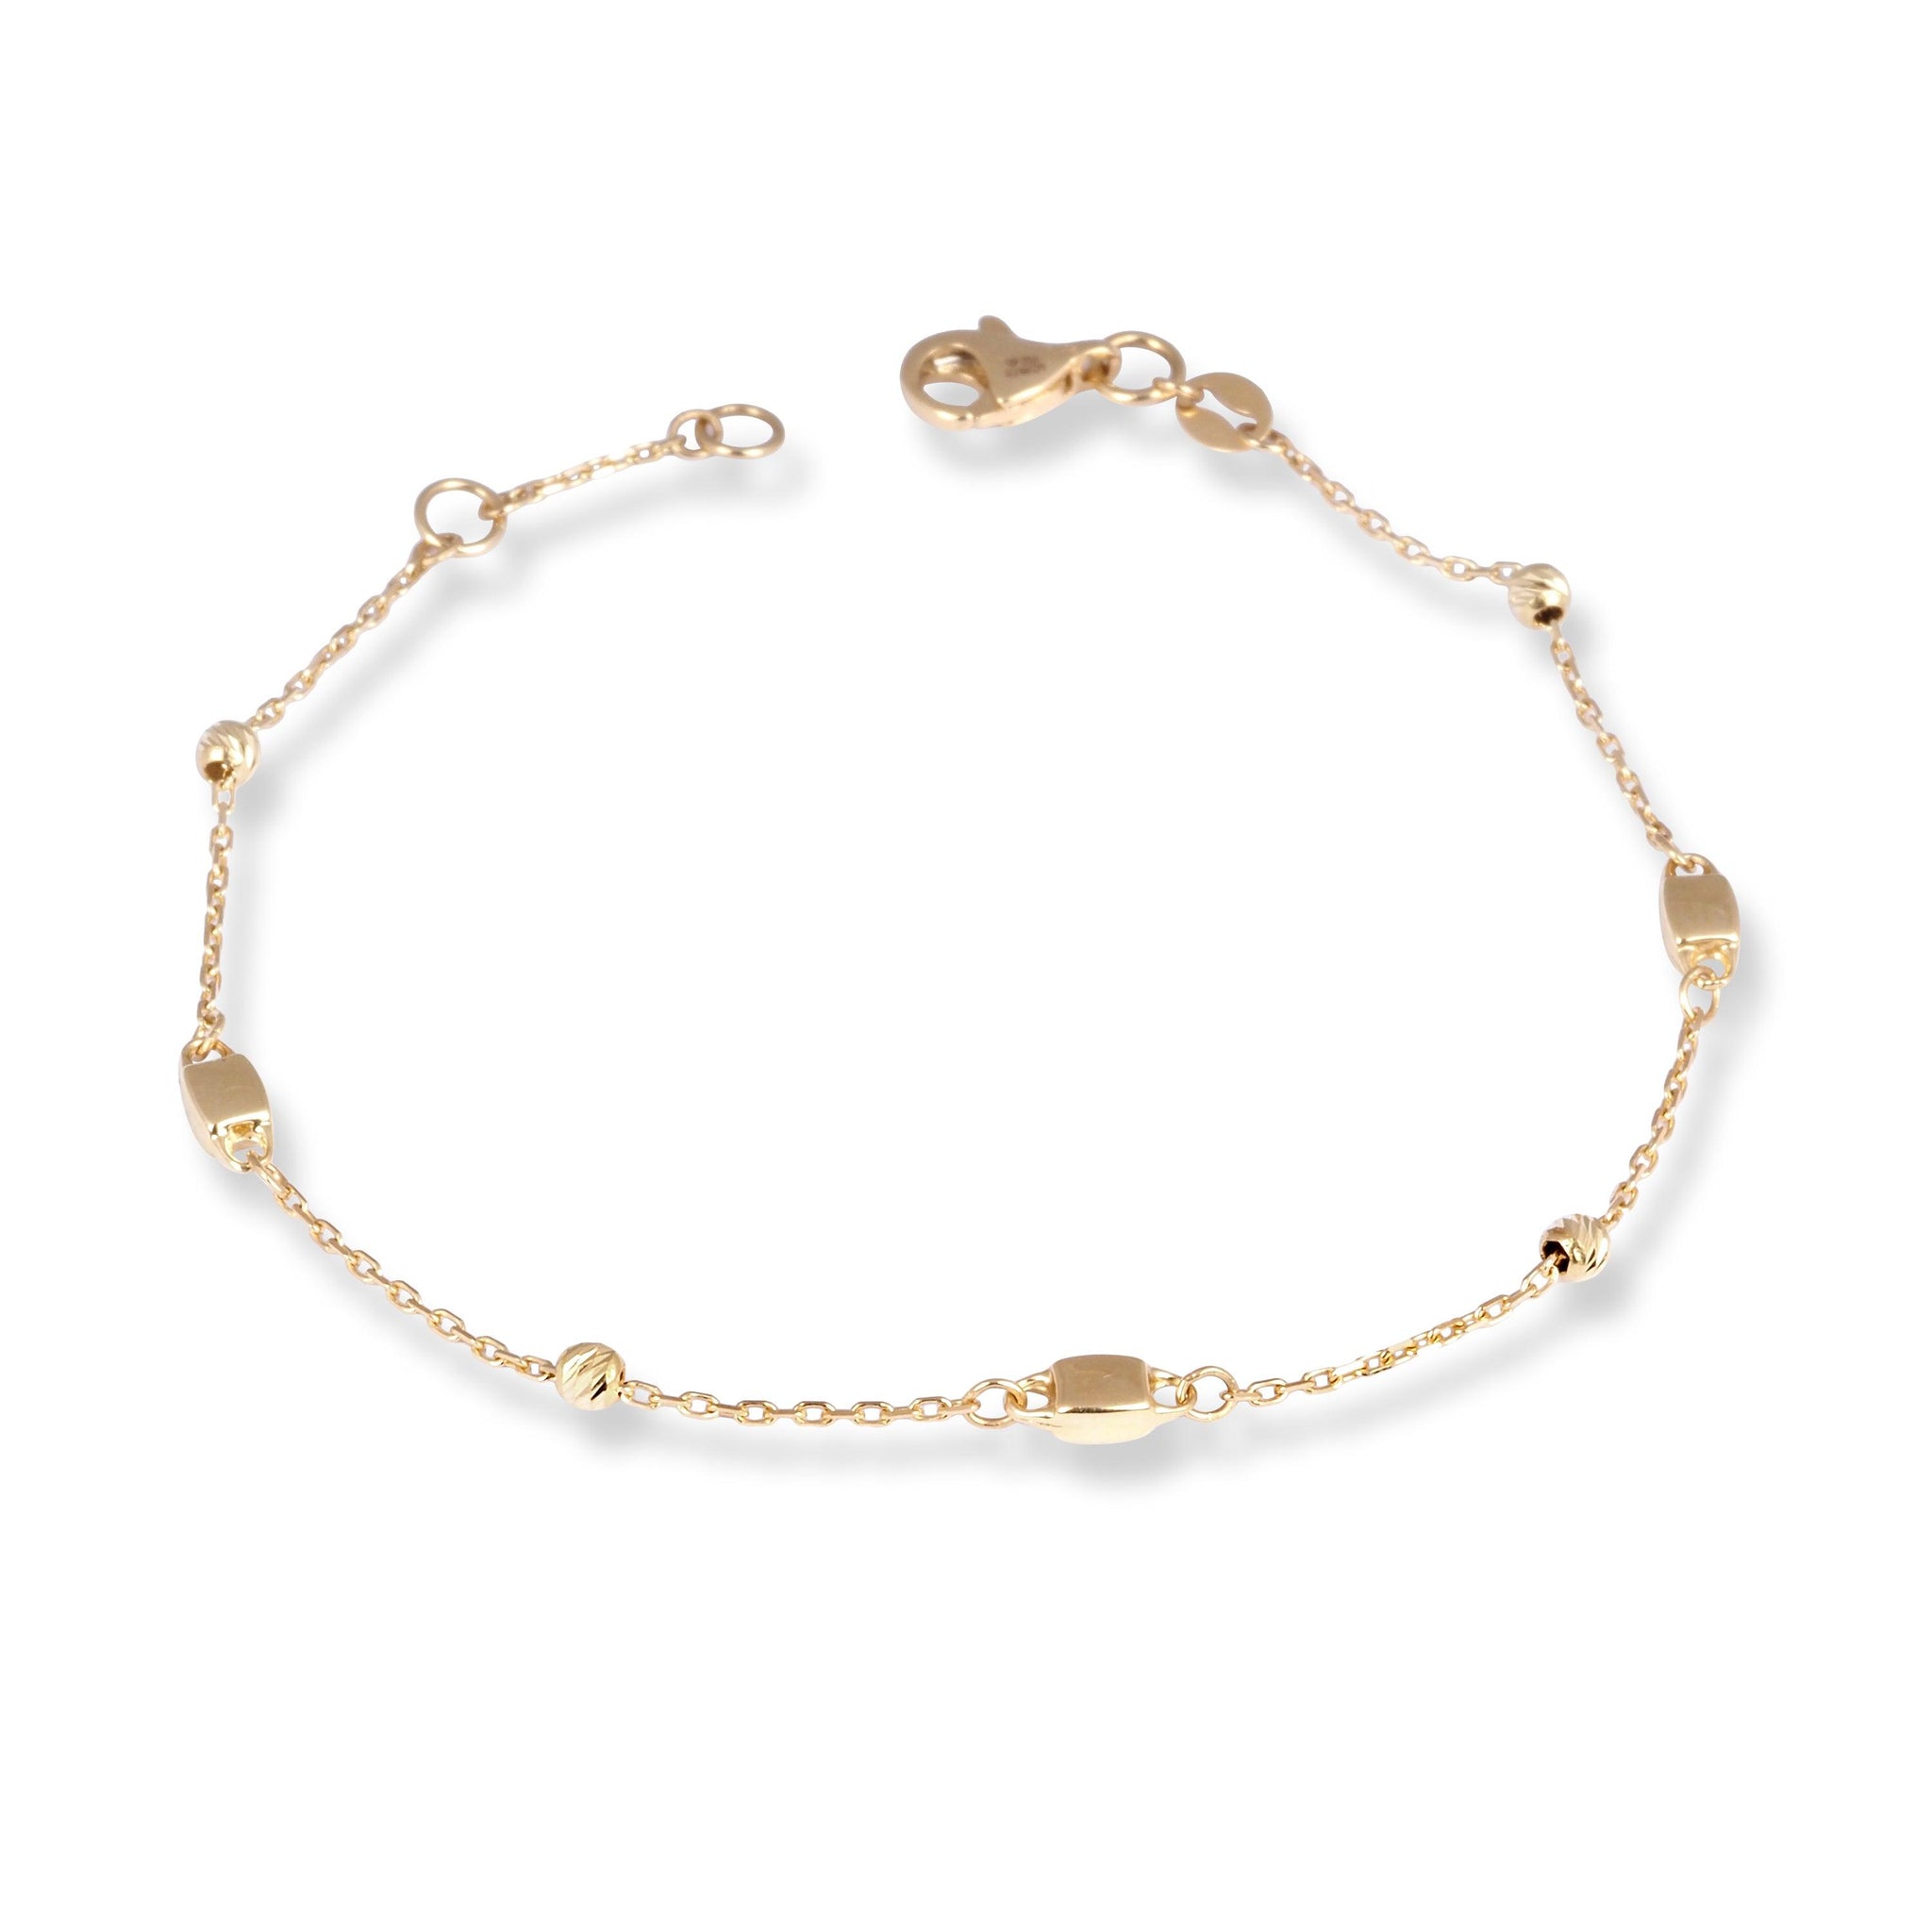 18ct Yellow Gold Bracelet with Two Typed of Beads and Lobster Clasp LBR-8488